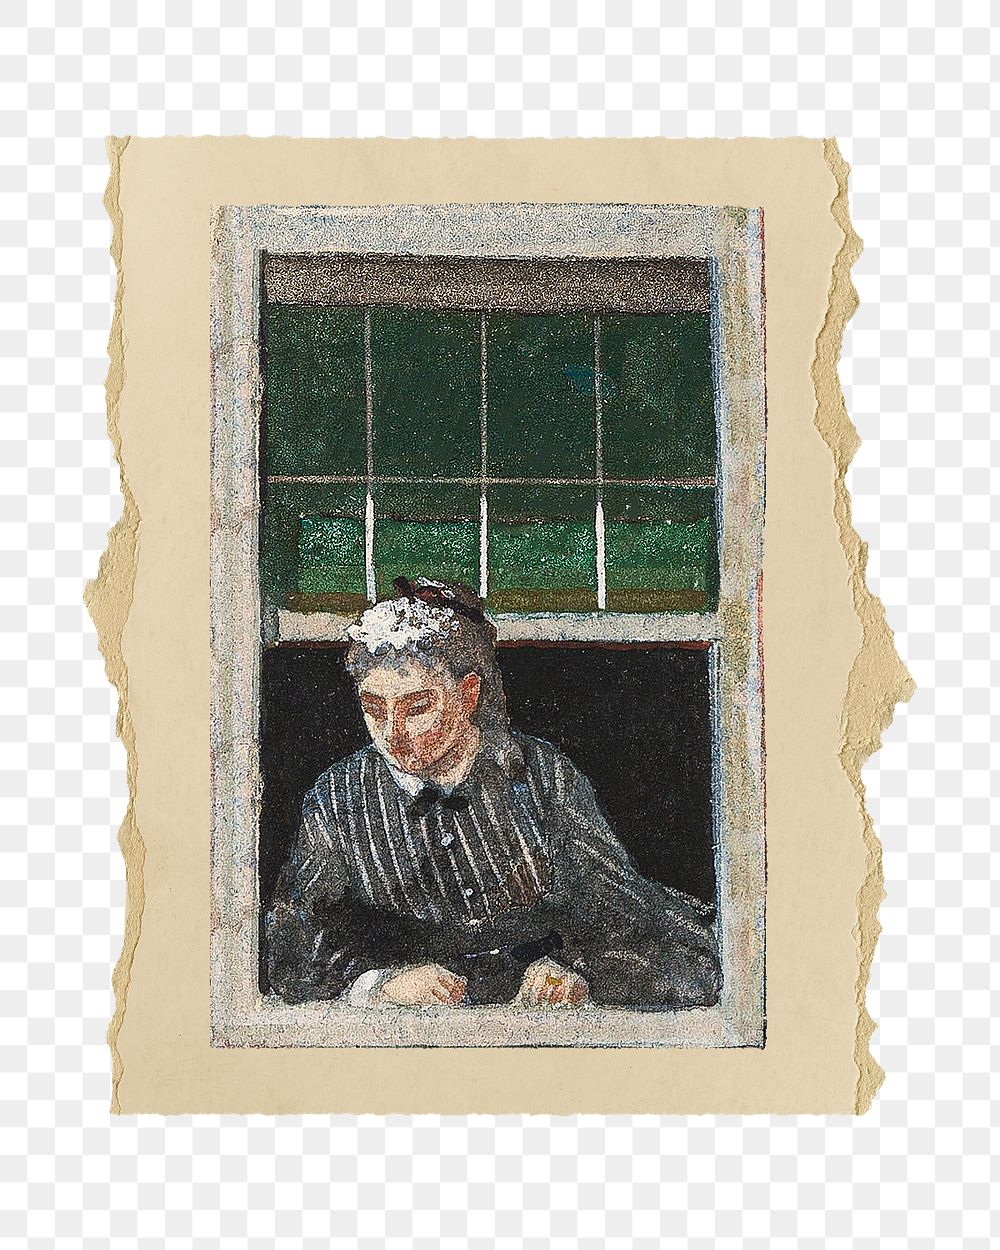 Vintage window png sticker, Winslow Homer-inspired artwork, transparent background, ripped paper badge, remixed by rawpixel